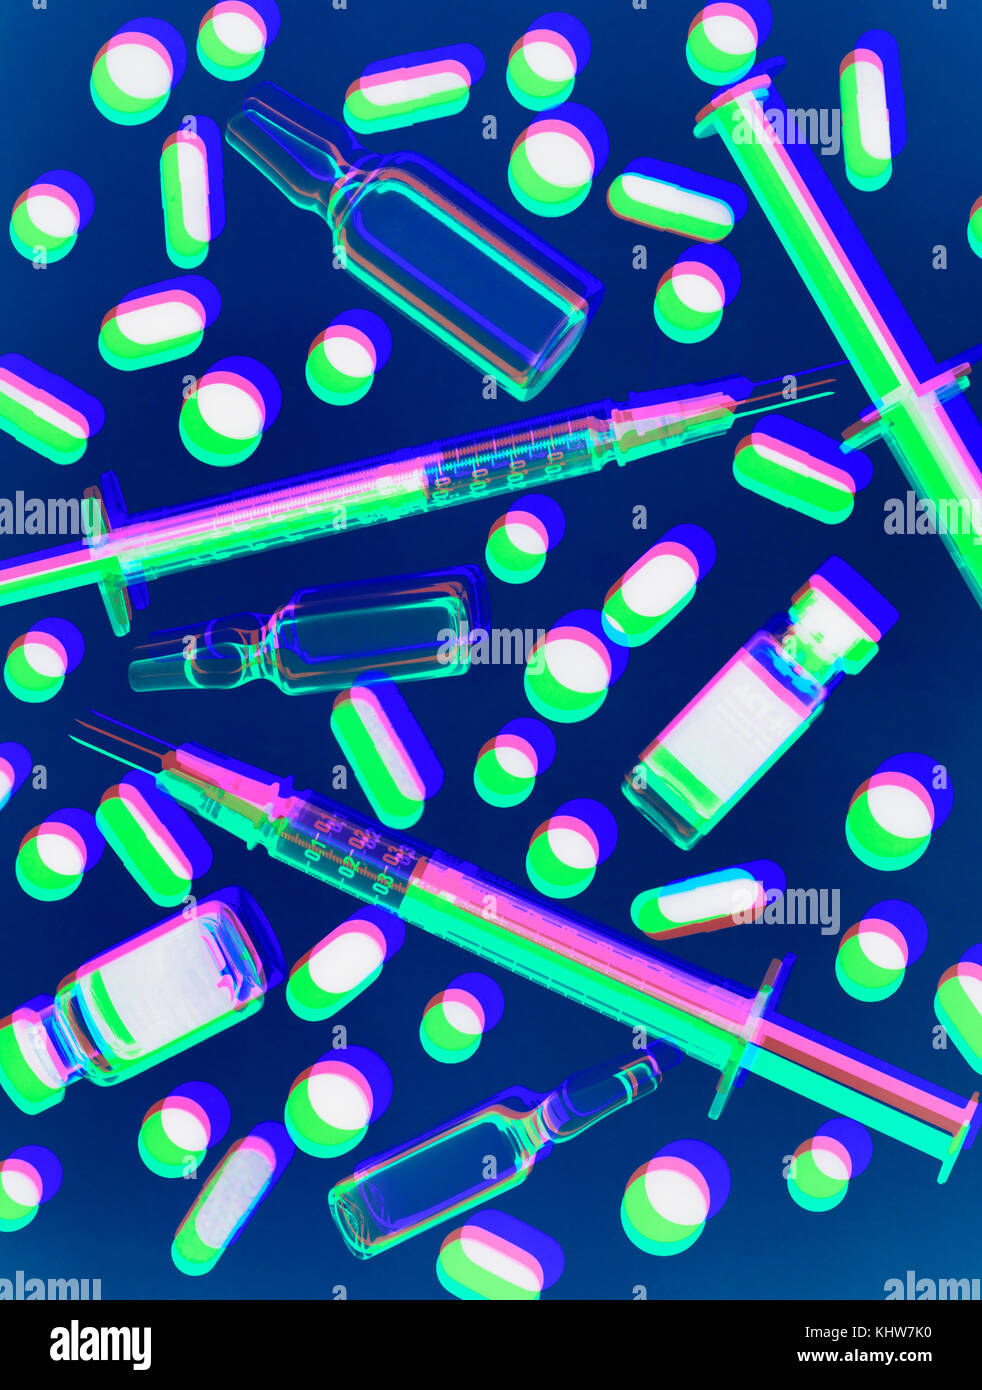 Multi exposure photogram with variety of medicine and syringes illustrating healthcare Stock Photo